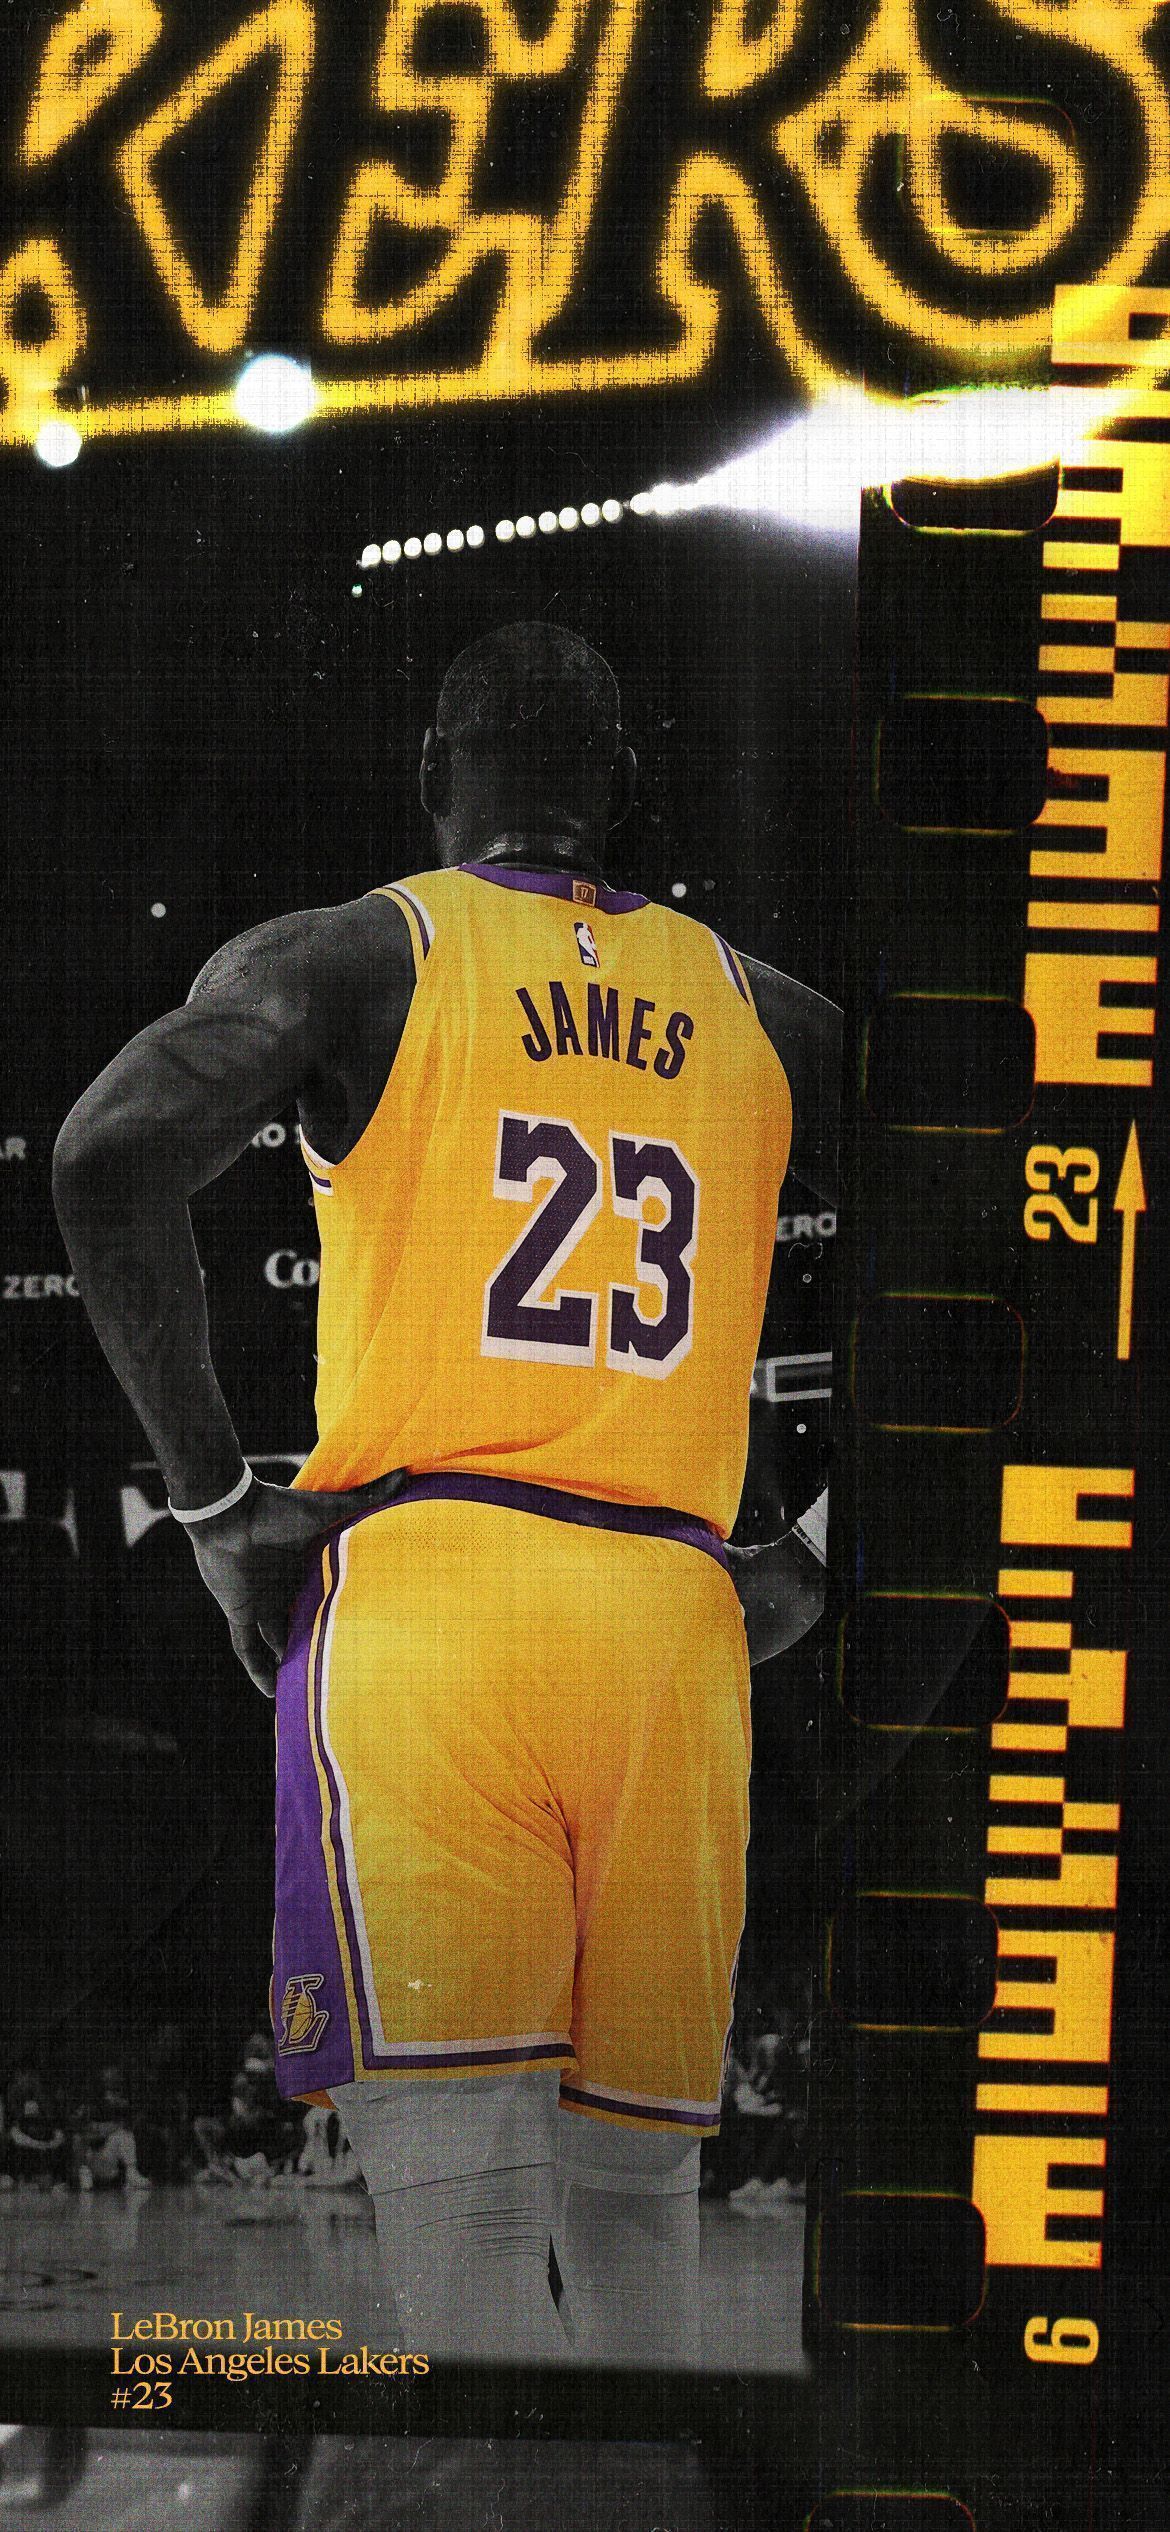 Lakers wallpaper for mobiles and desktops - Los Angeles Lakers, Lebron James